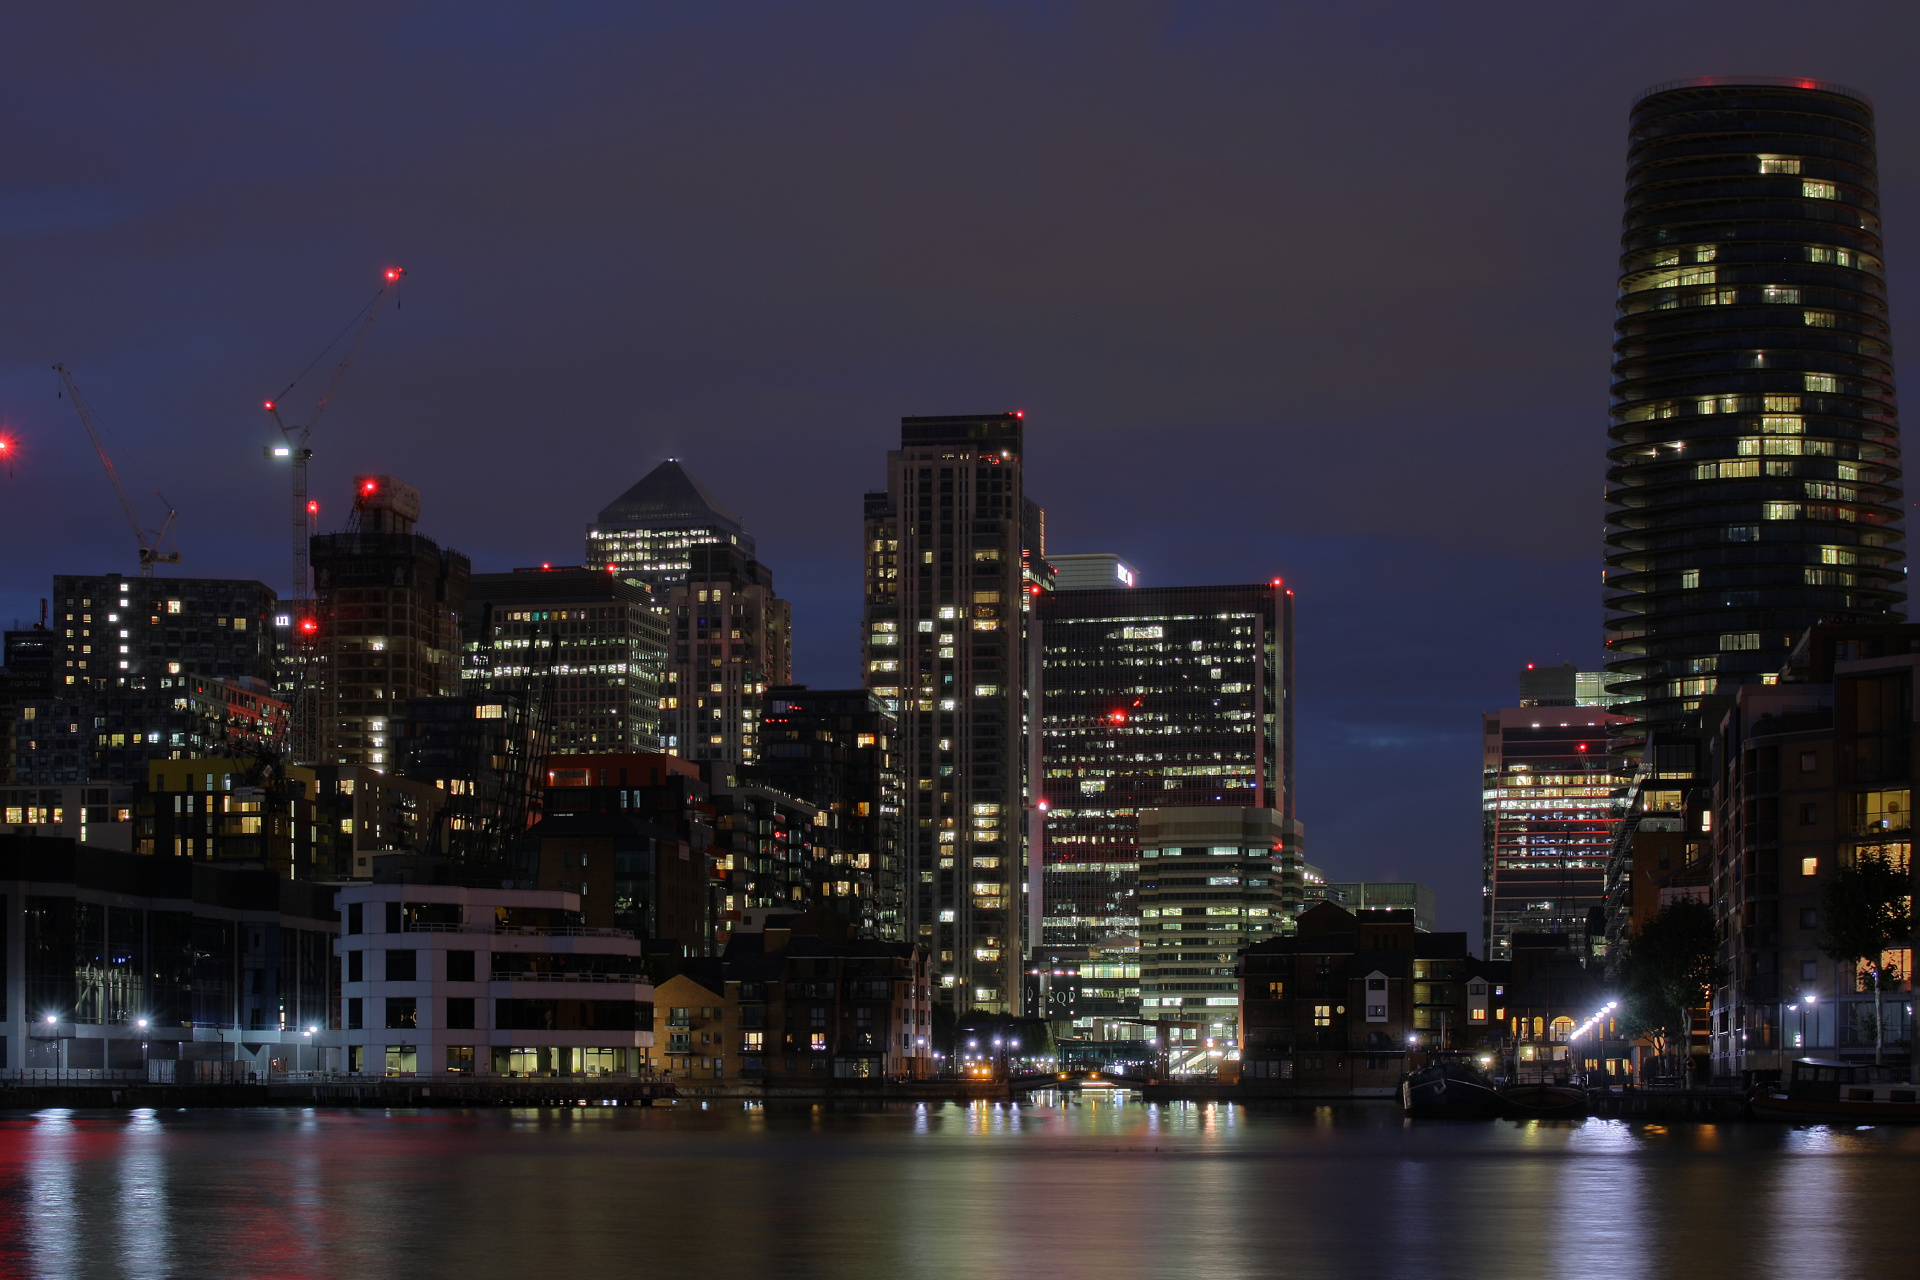 Millwall Dock and Canary Wharf (Travels » London » London at Night)